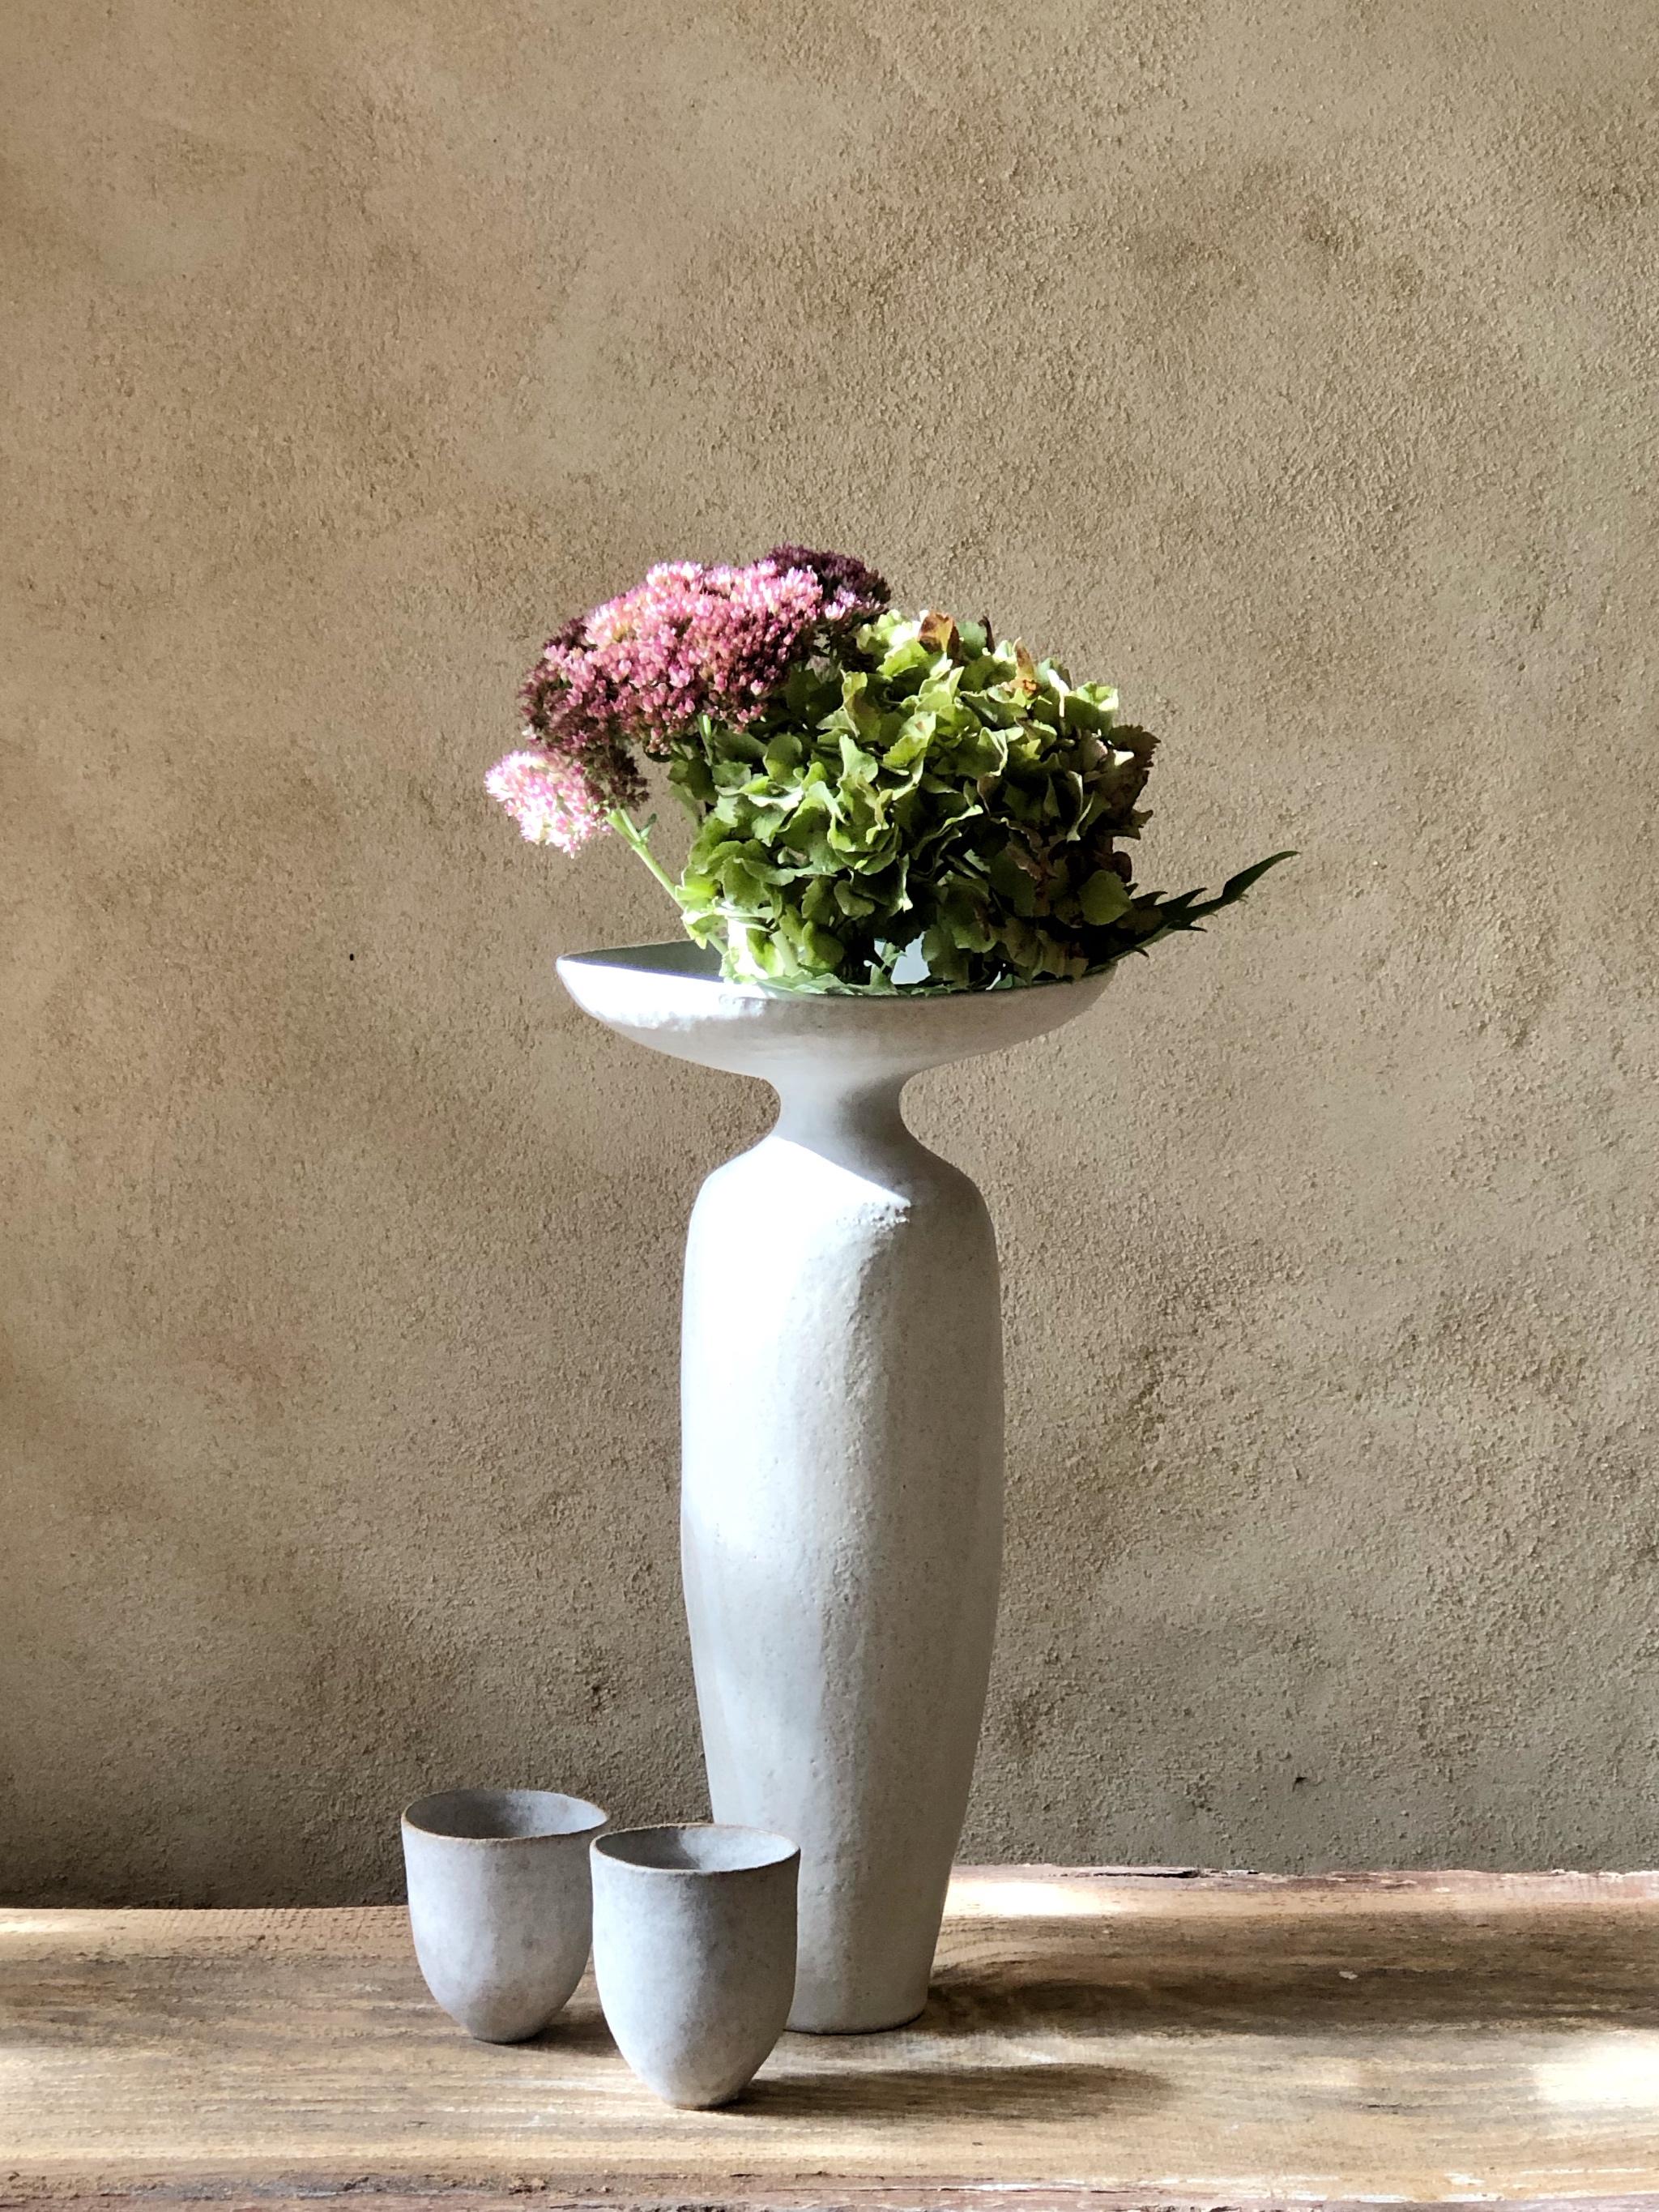 Corolla Vase by Sophie Vaidie
One Of A Kind.
Dimensions: Ø 15 x H 35 cm. 
Materials: Beige stoneware with white mat glaze.

In the beginning, there was a need to make, with the hands, the touch, the senses. Then came the desire to create and imagine